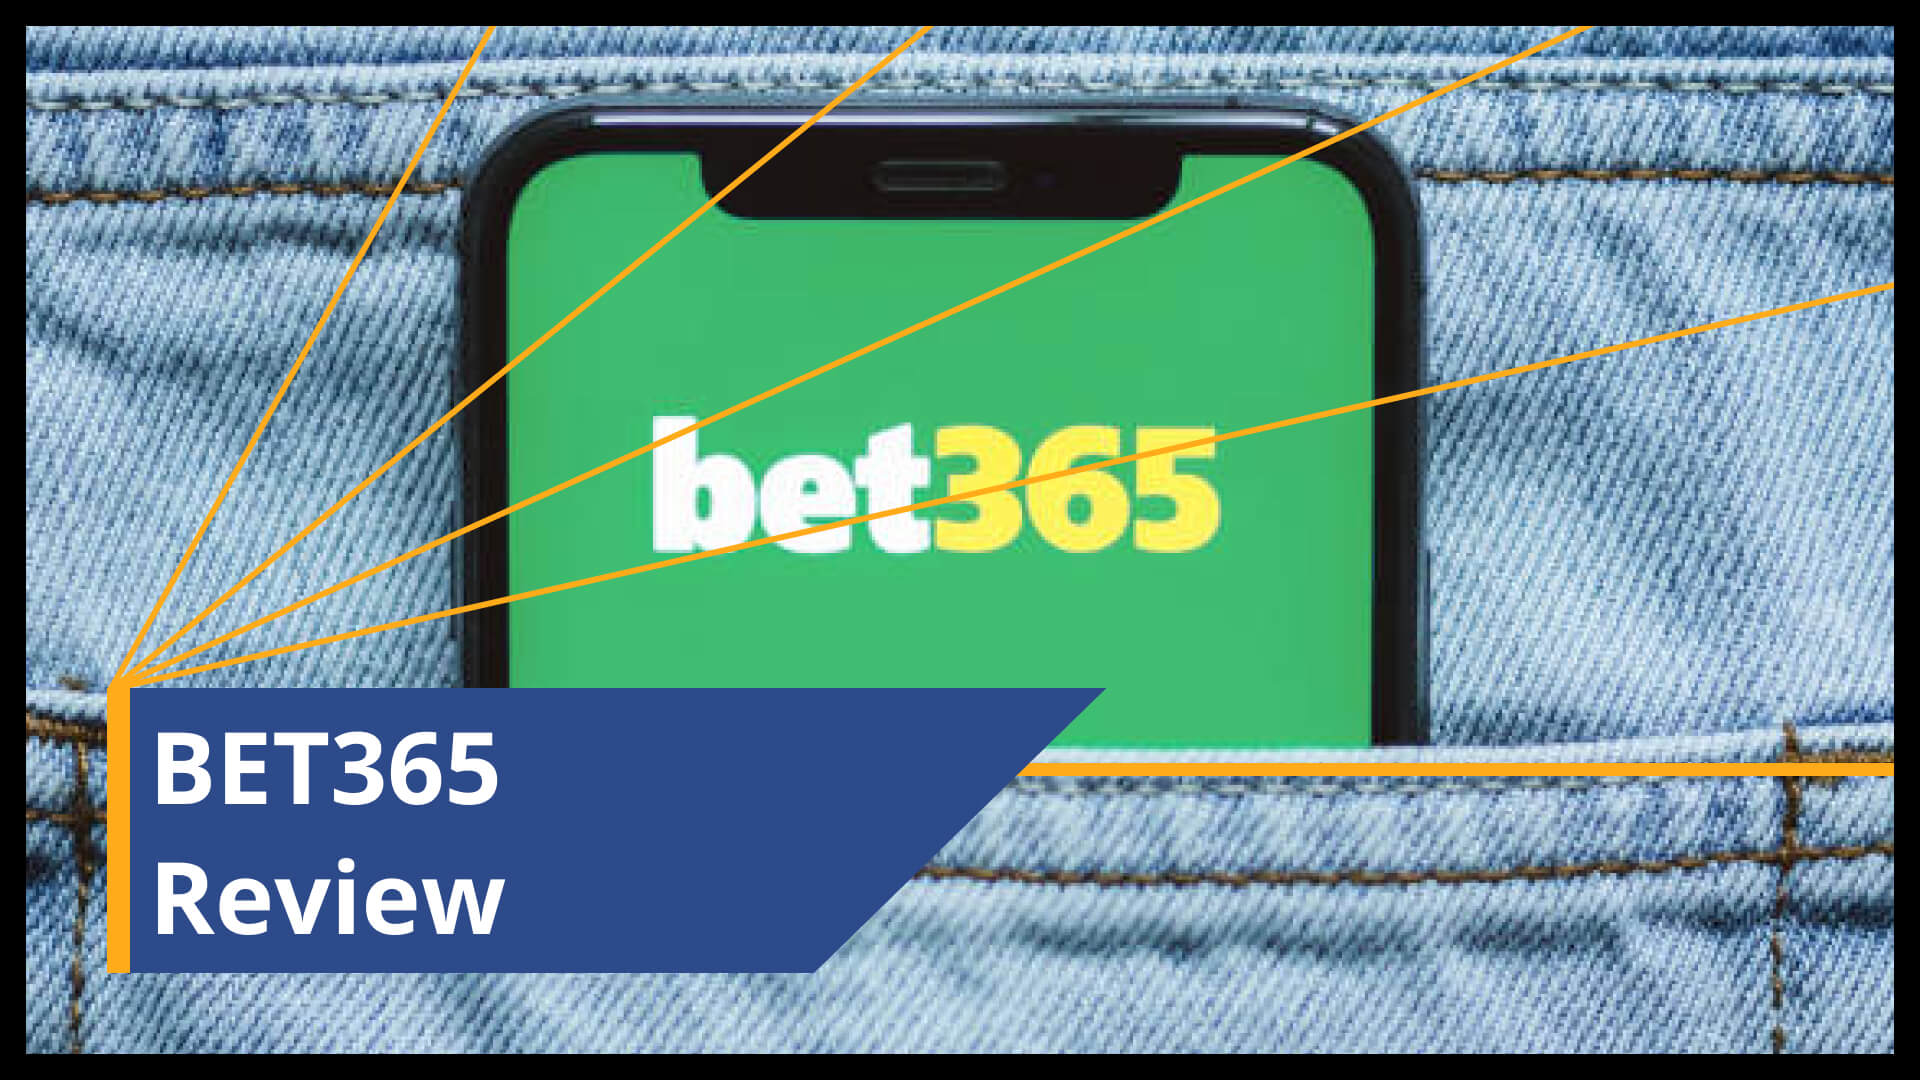 Get the Bet365 app and be ready to win big!